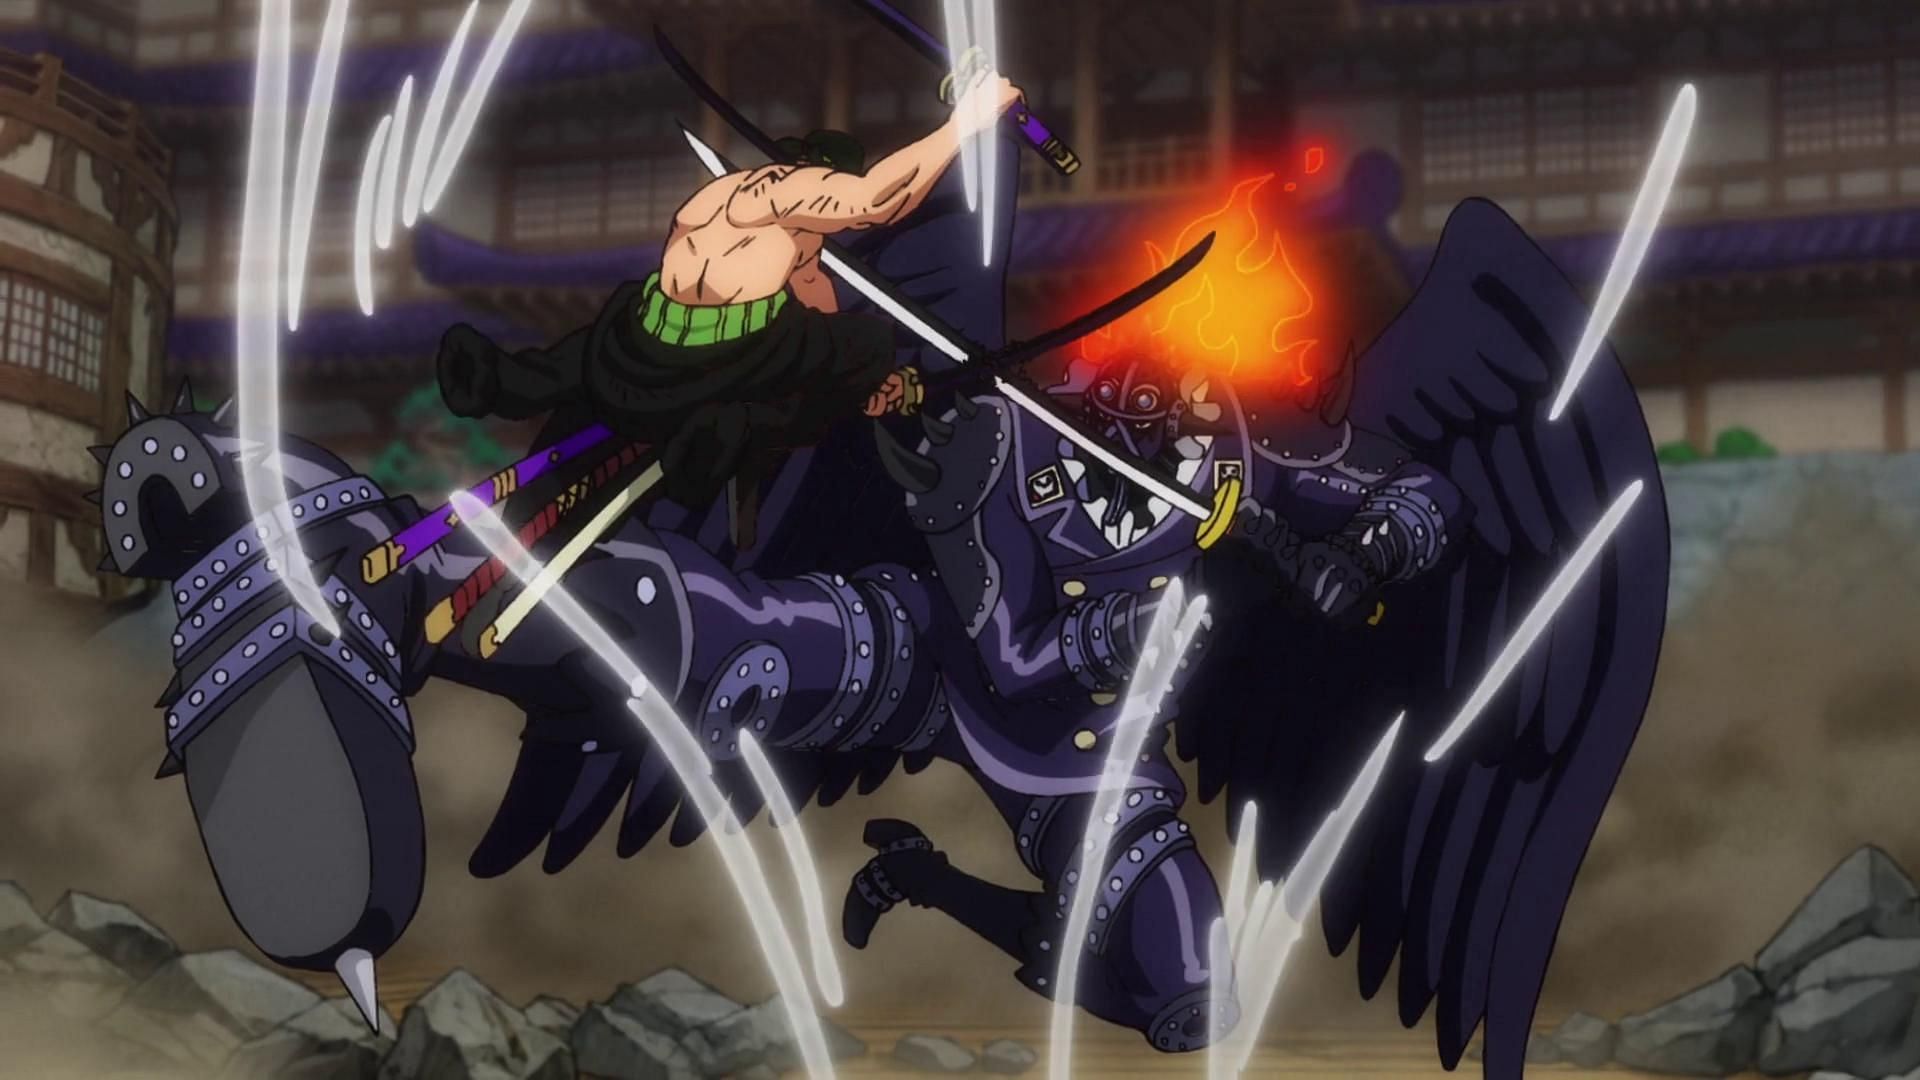 The showdown as seein in the One Piece anime (Image via Toei Animation, One Piece)